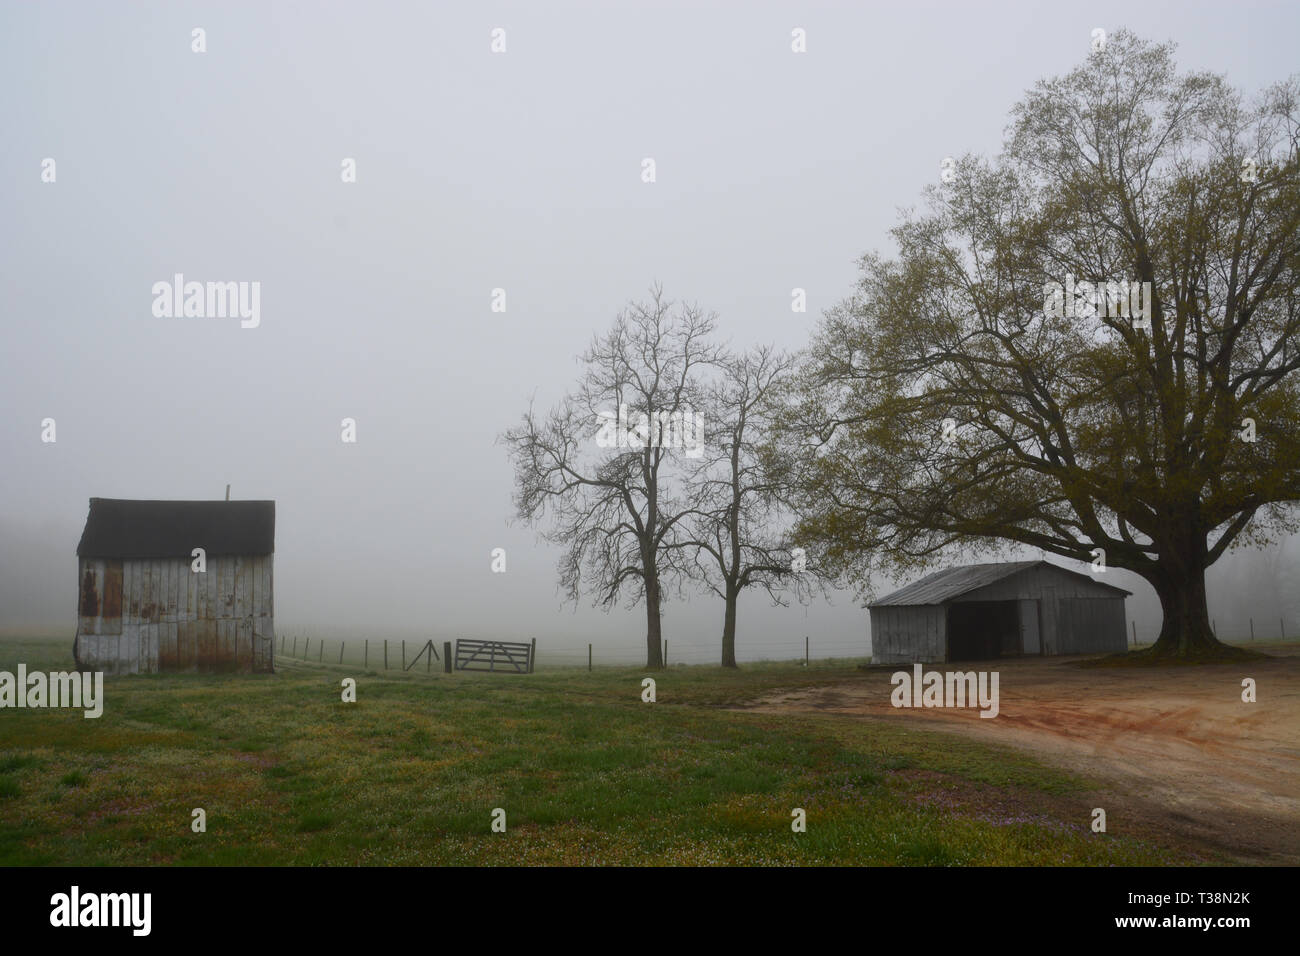 A dense morning fog obscures farmland beyond weathered outbuildings in Wake Forest North Carolina. Stock Photo